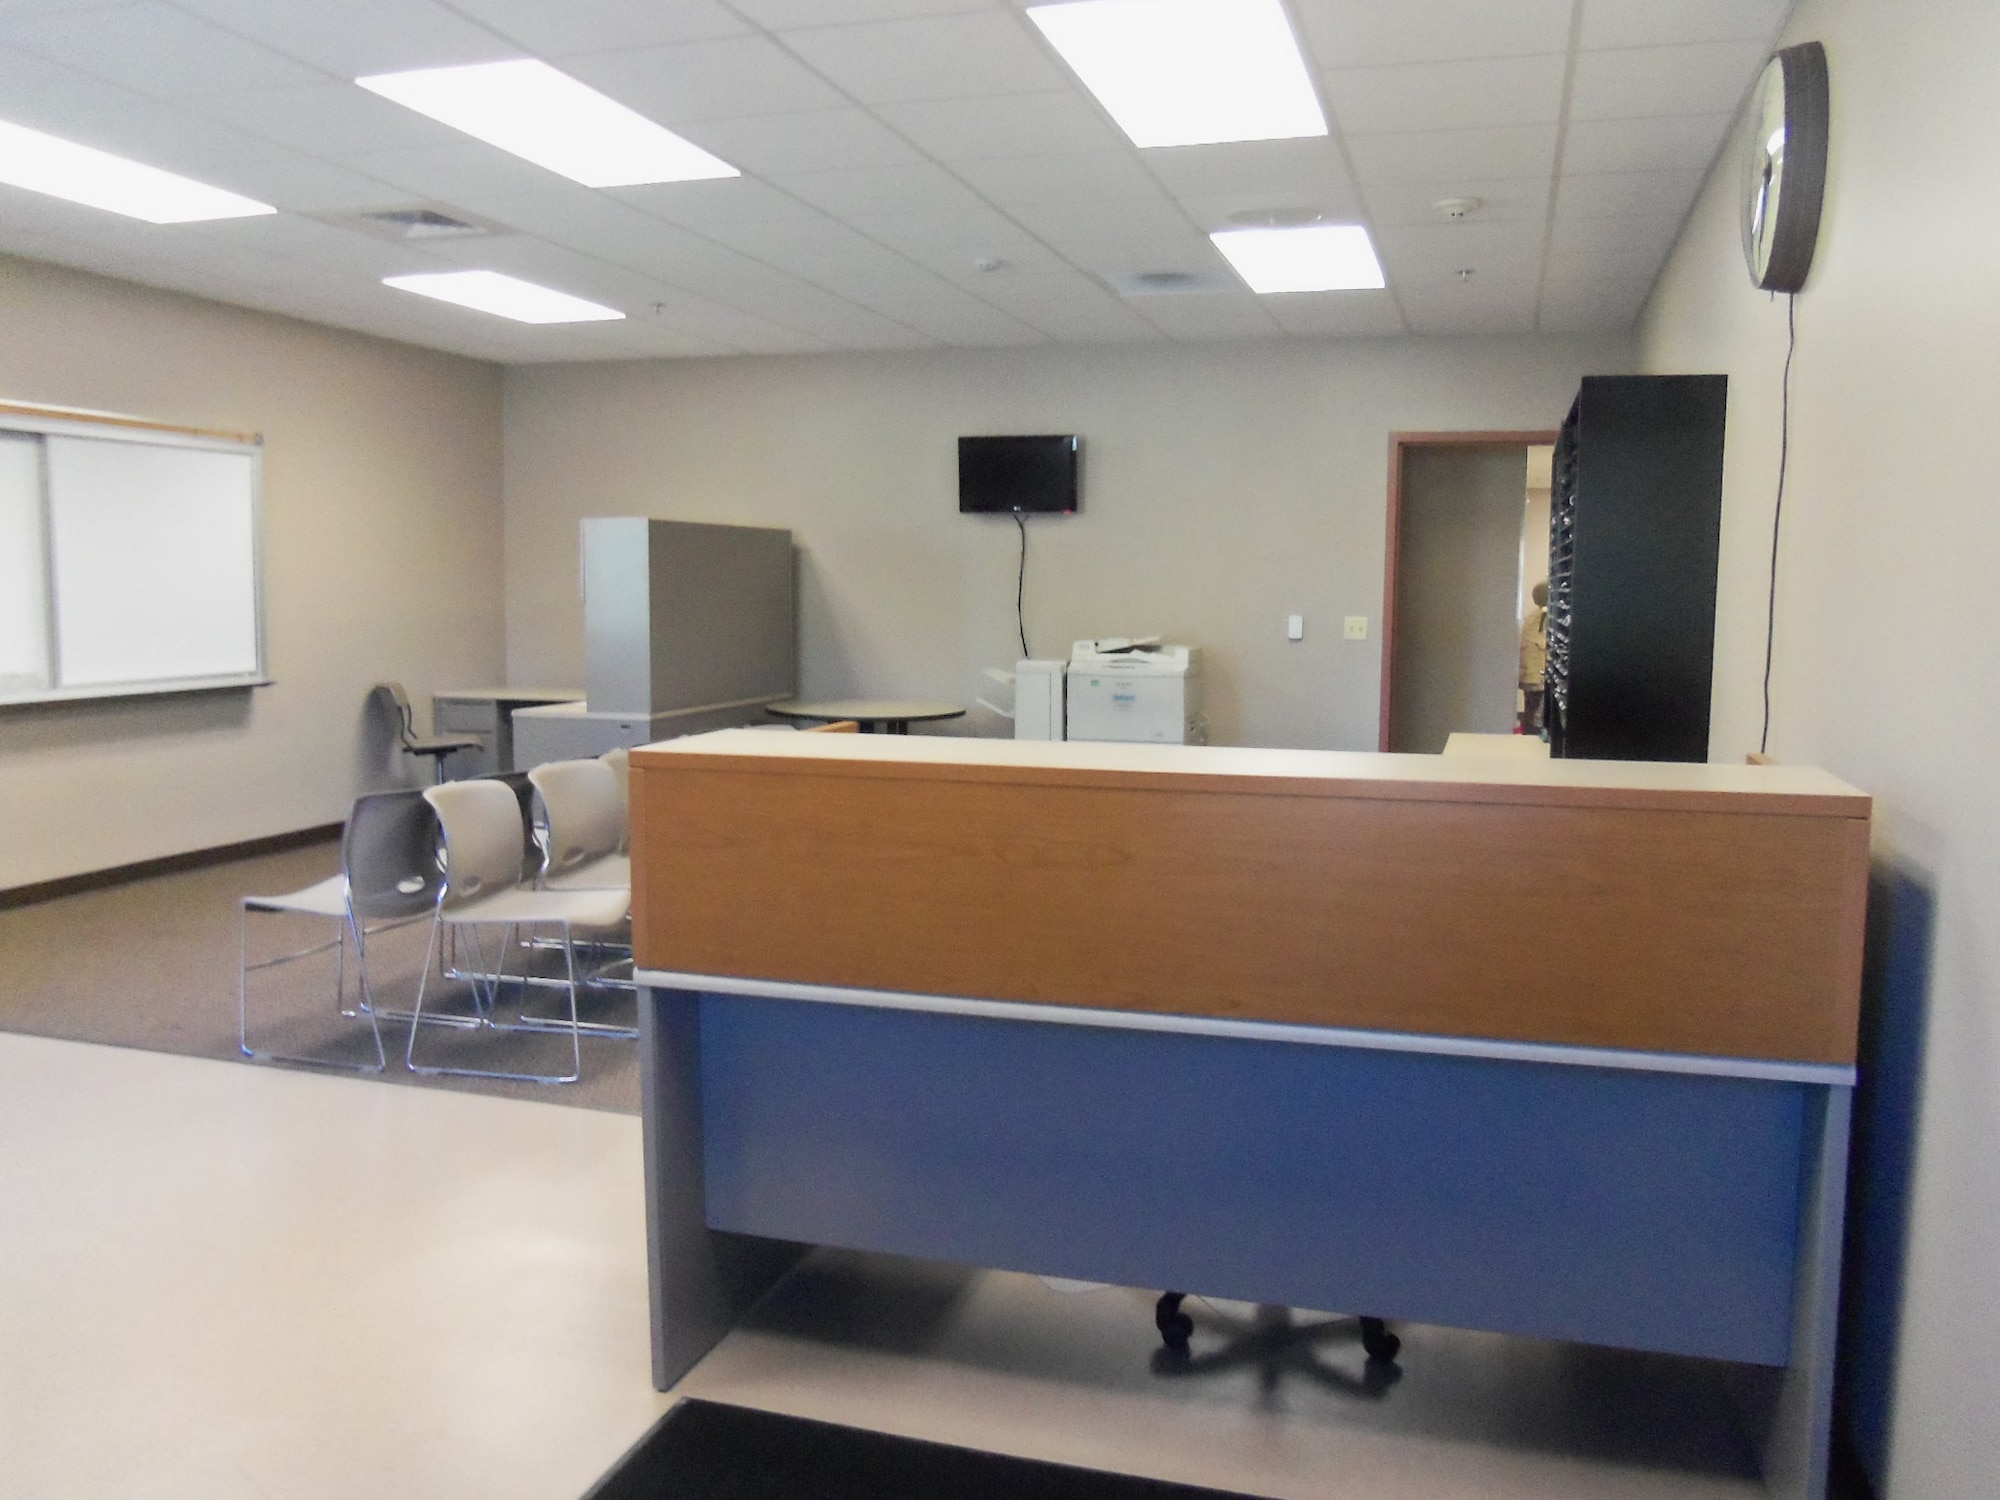 The Alpena CRTC Vehicle Maintenance facility offers a transient / visiting unit office space with 567 square feet.